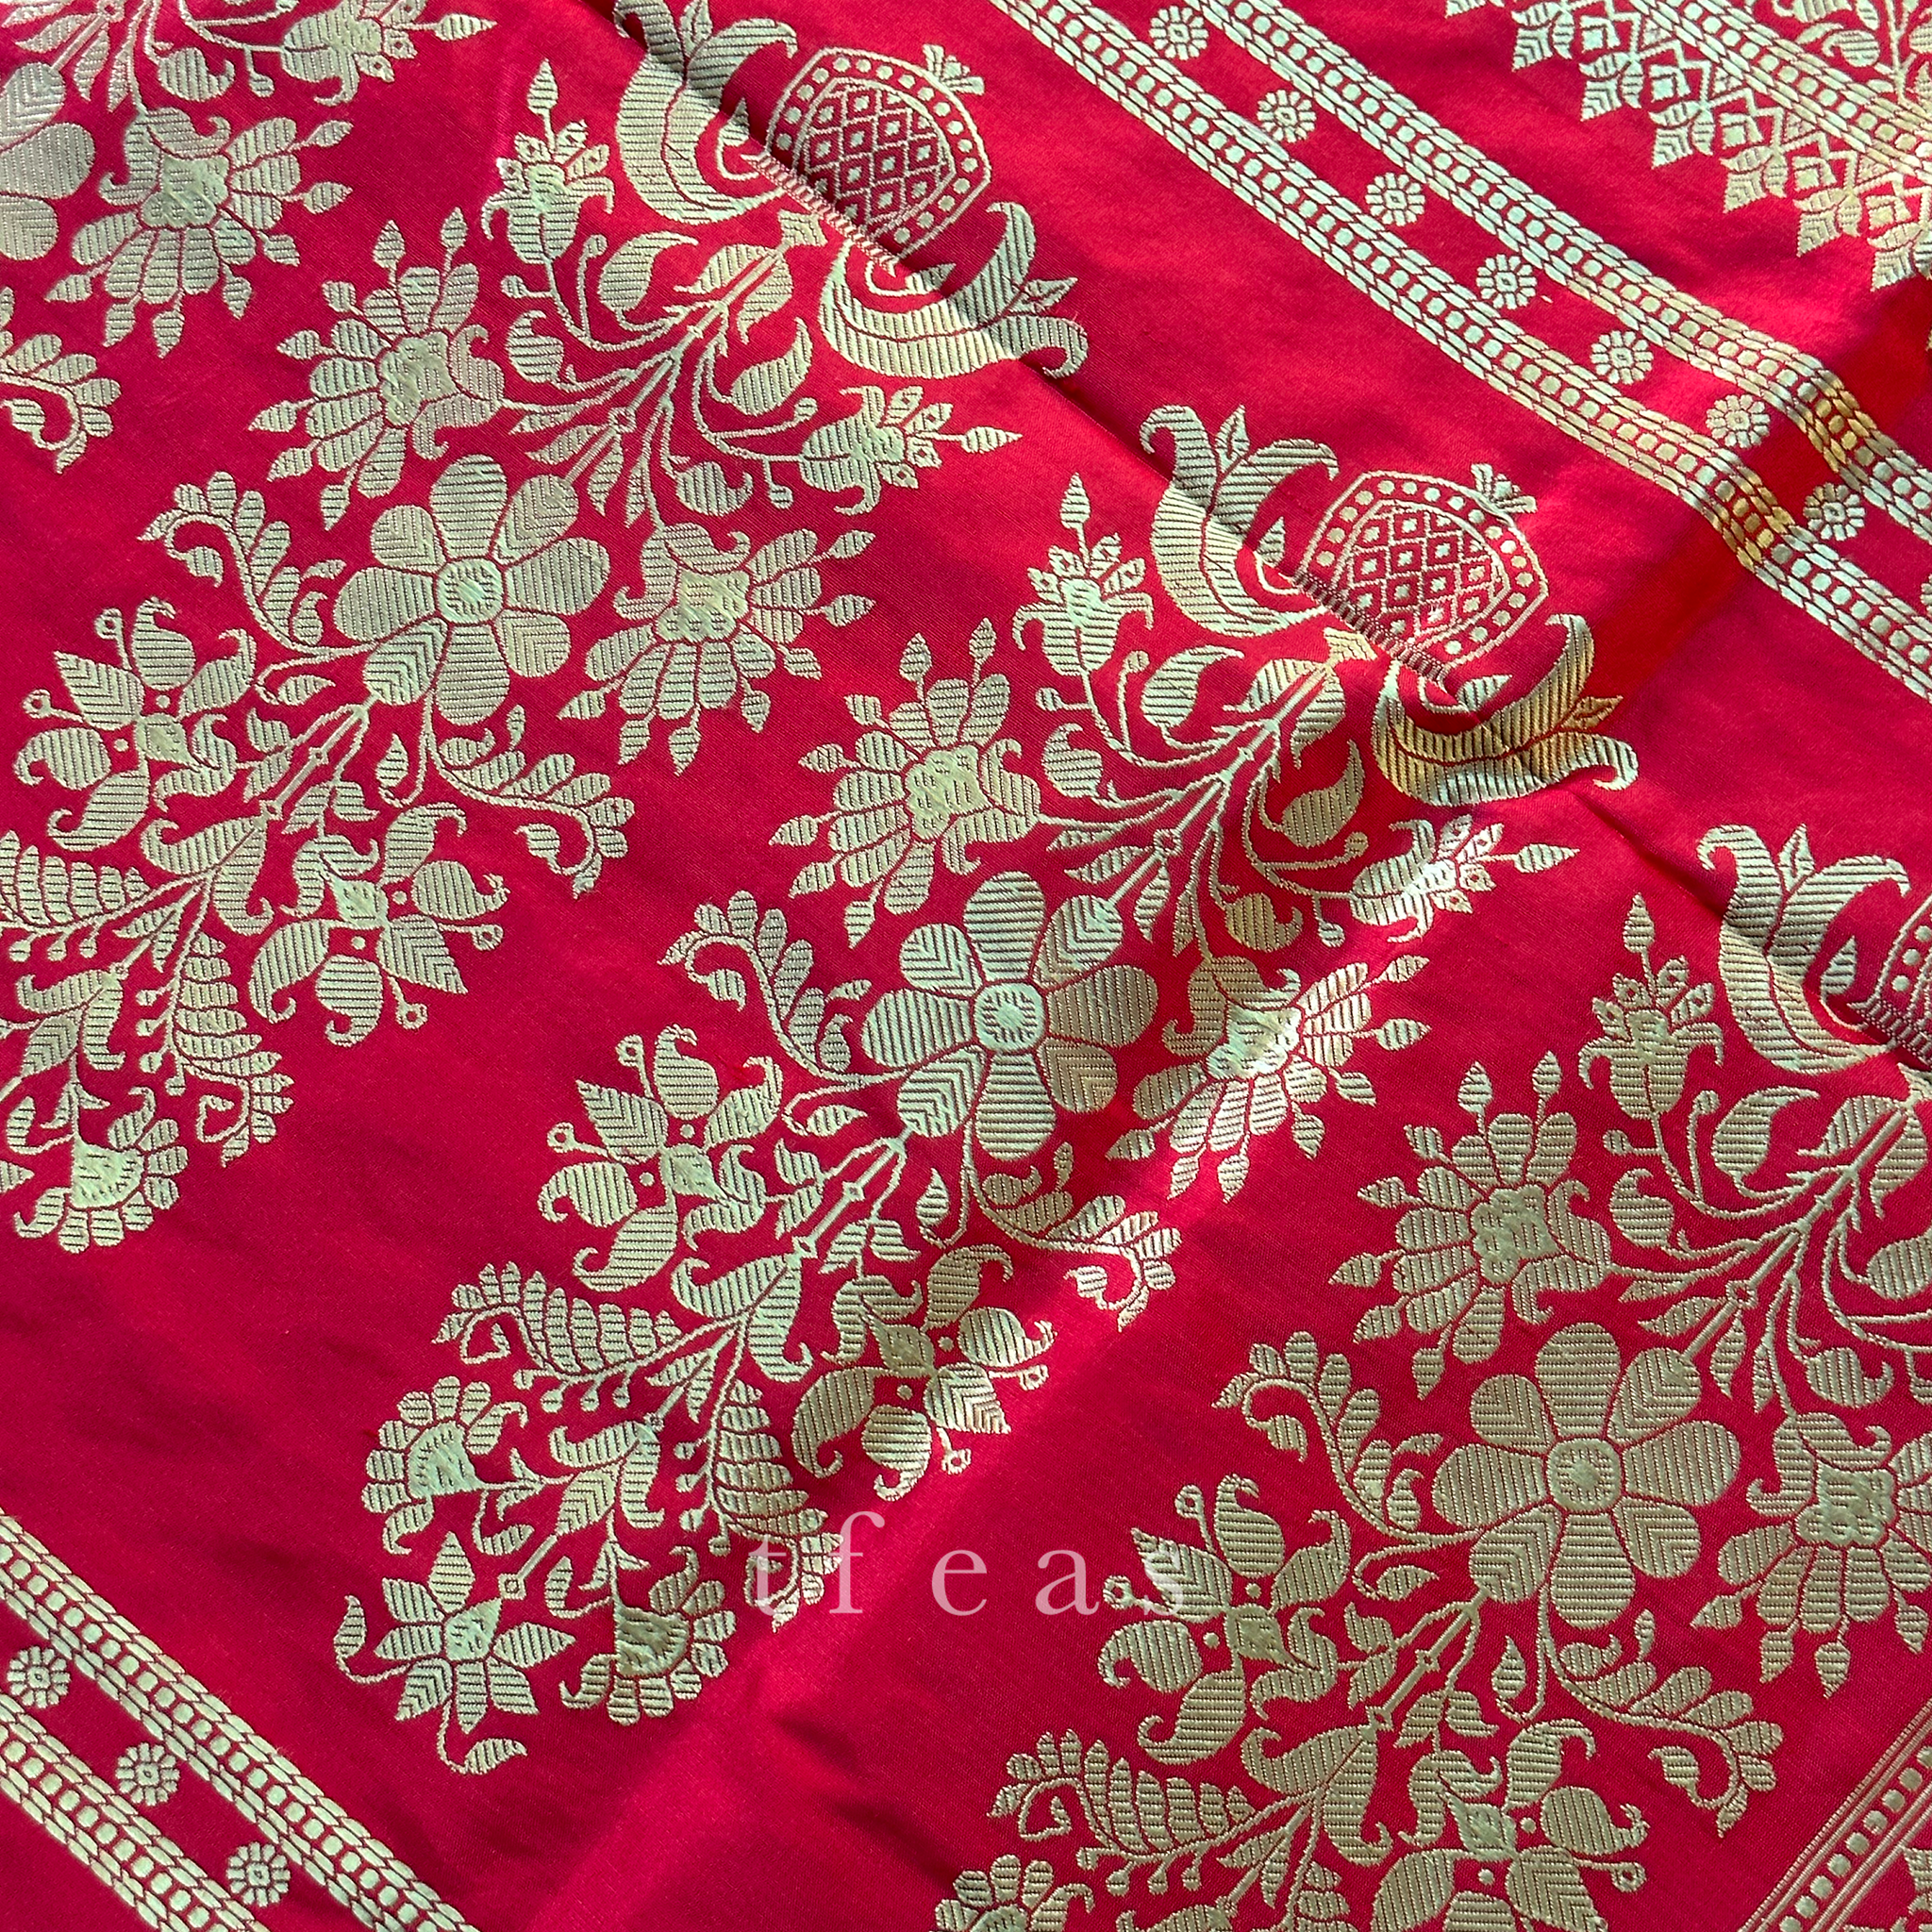 Red Revival Baluchari Saree with tree of life